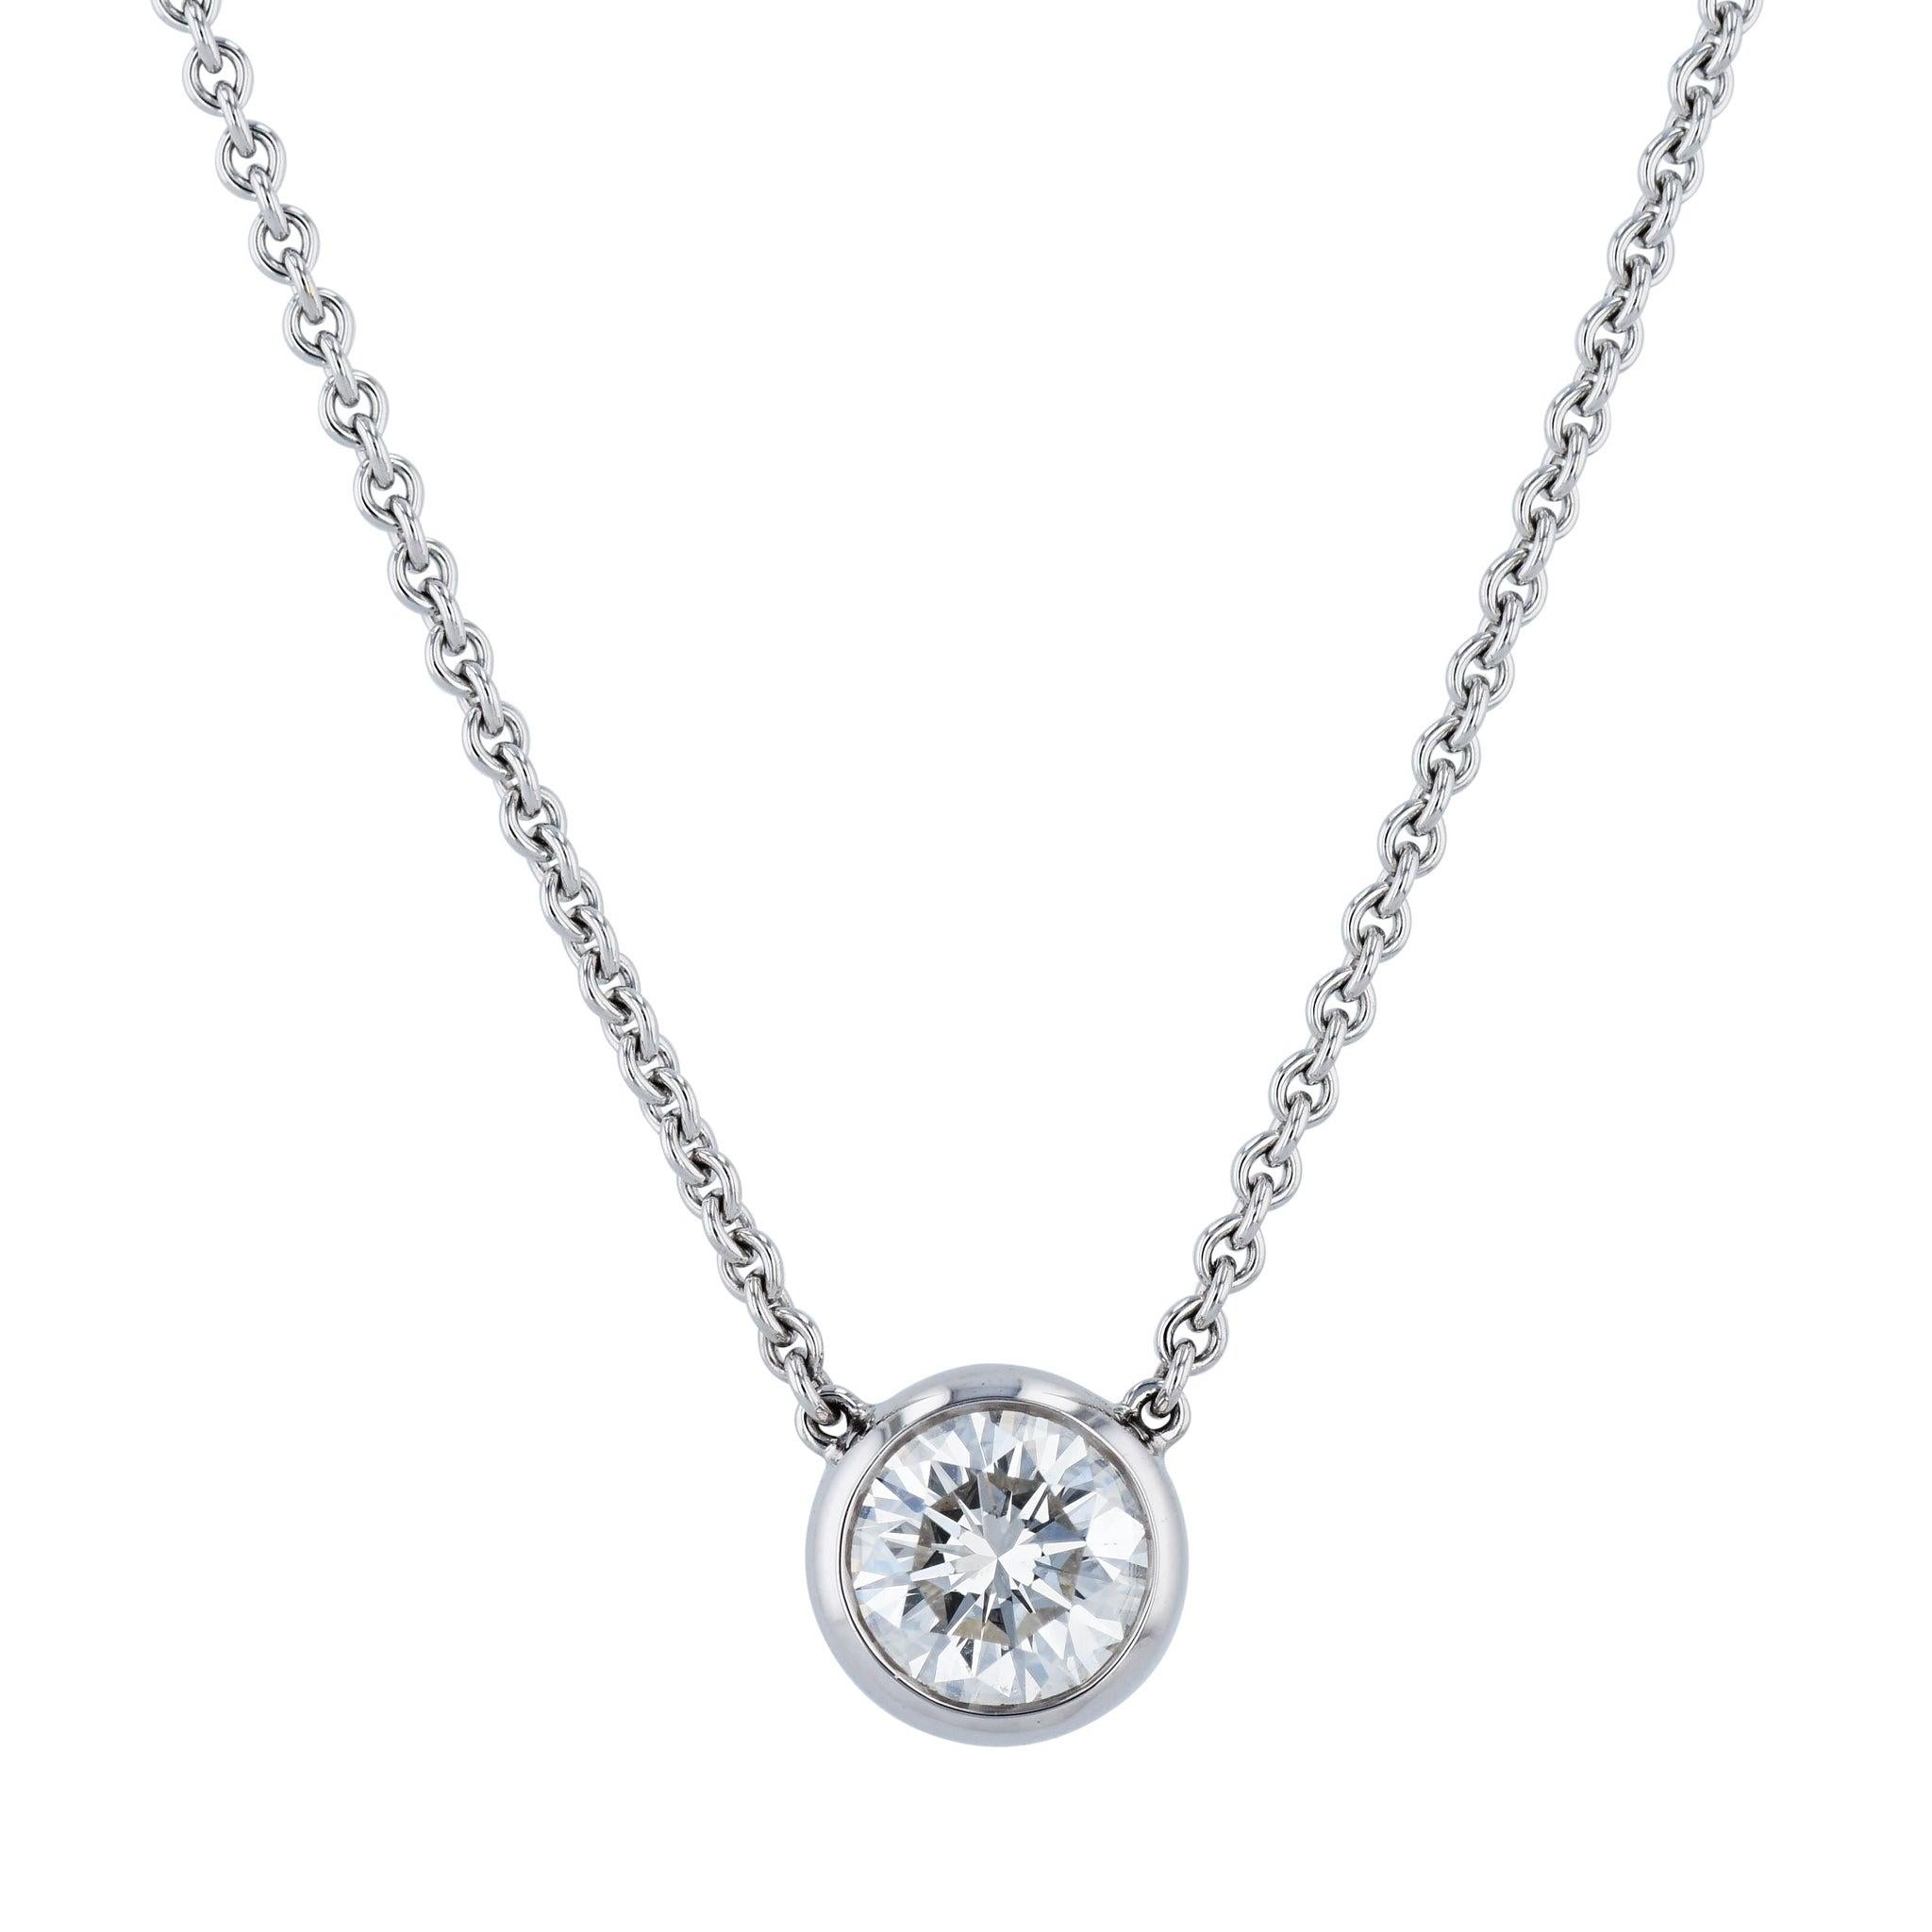 Treat yourself to an exquisite piece of jewelry with this Round Diamond White Gold Pendant Necklace! Crafted with 18K white gold with a Bezel-Set Diamond. This gorgeous necklace is further accented with a 16